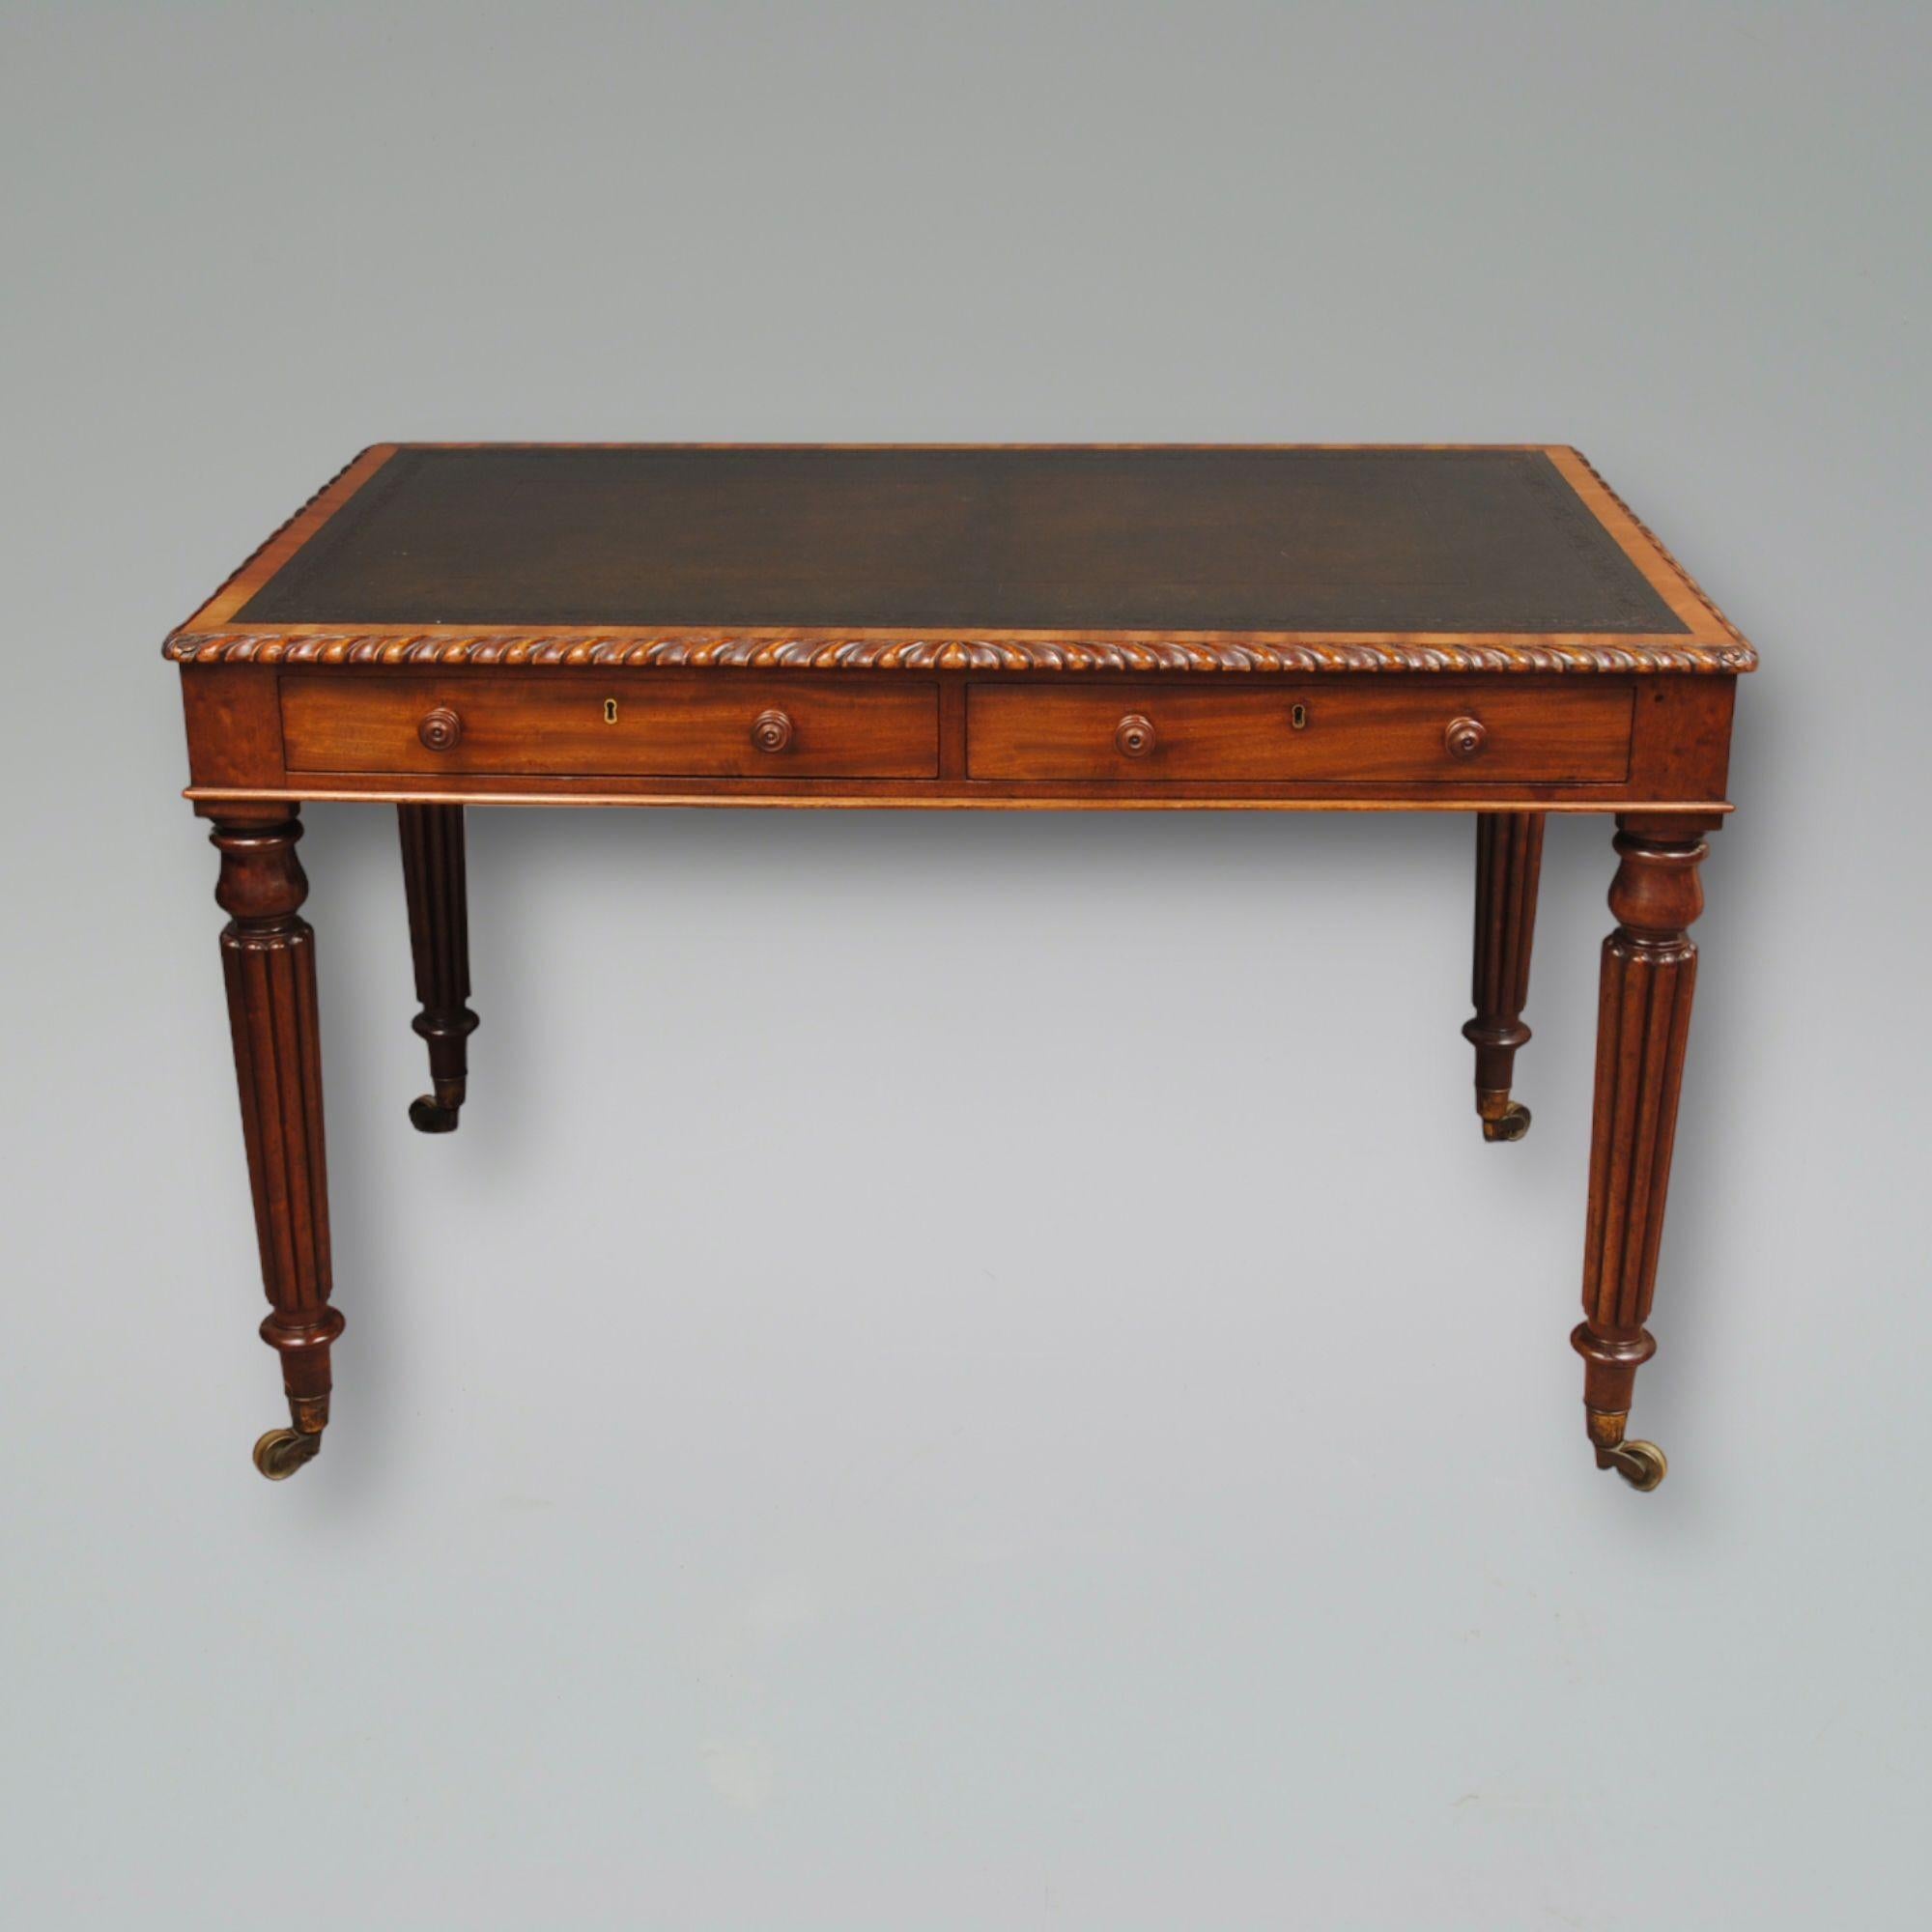 A good regency mahogany writing table in the manner of Gillows of Lancaster with a reeded leg and unusual gradooned top mould. Good colour and patina, the leather top look to be original certainly has a good age. Circa 1825